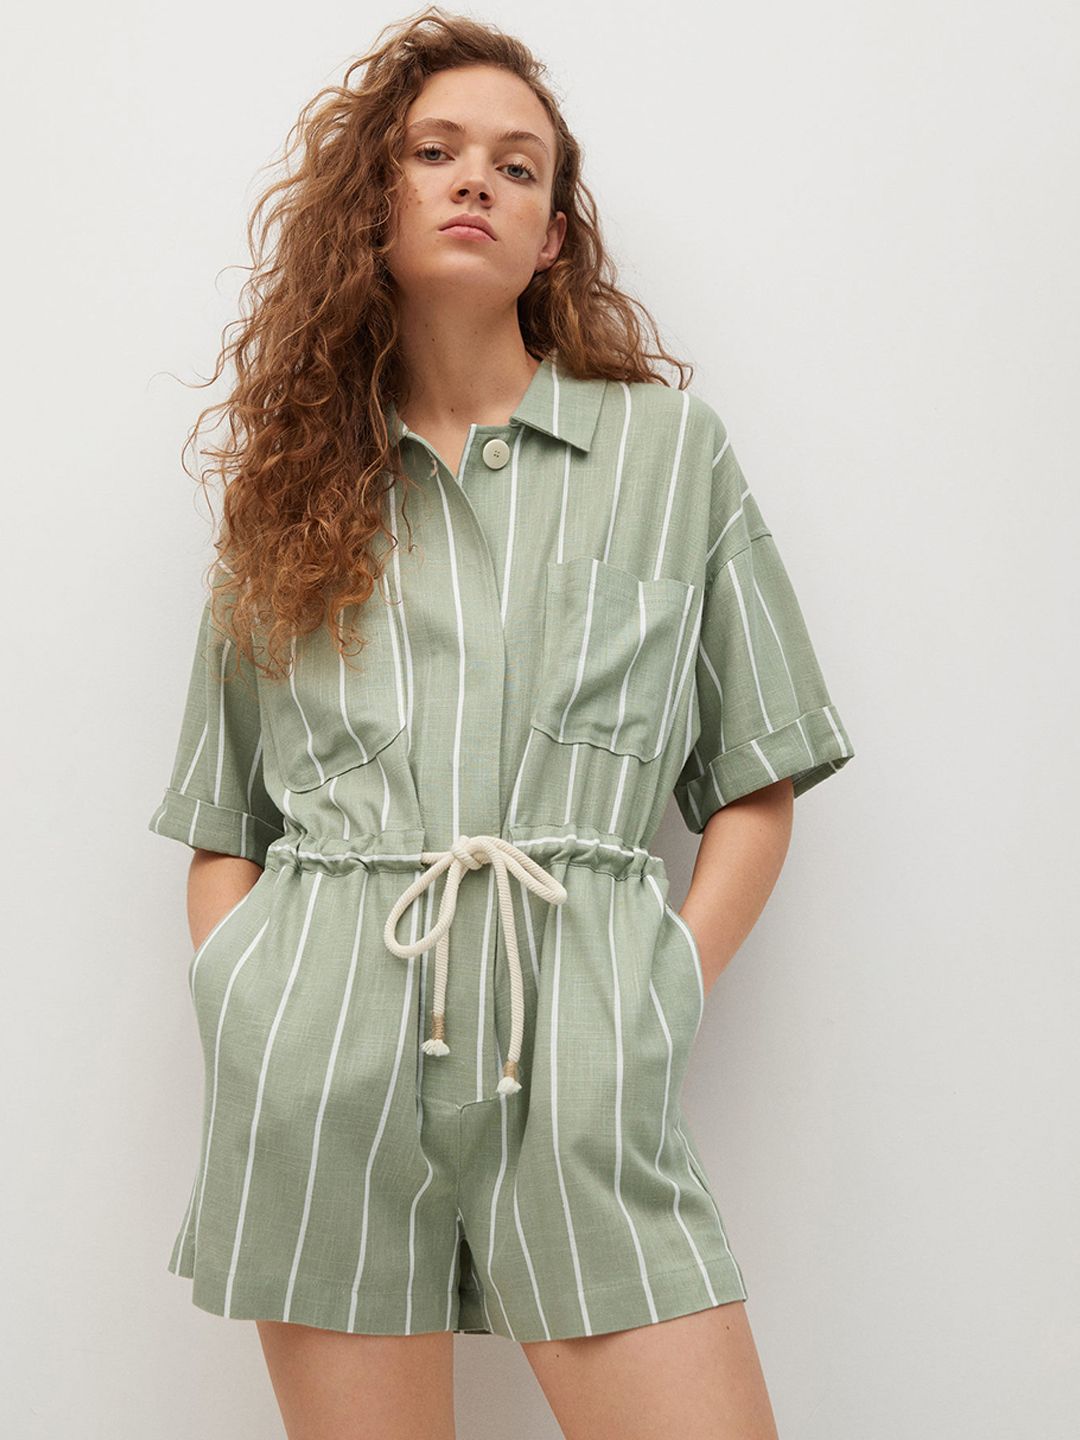 MANGO Green & White Striped Playsuit Price in India